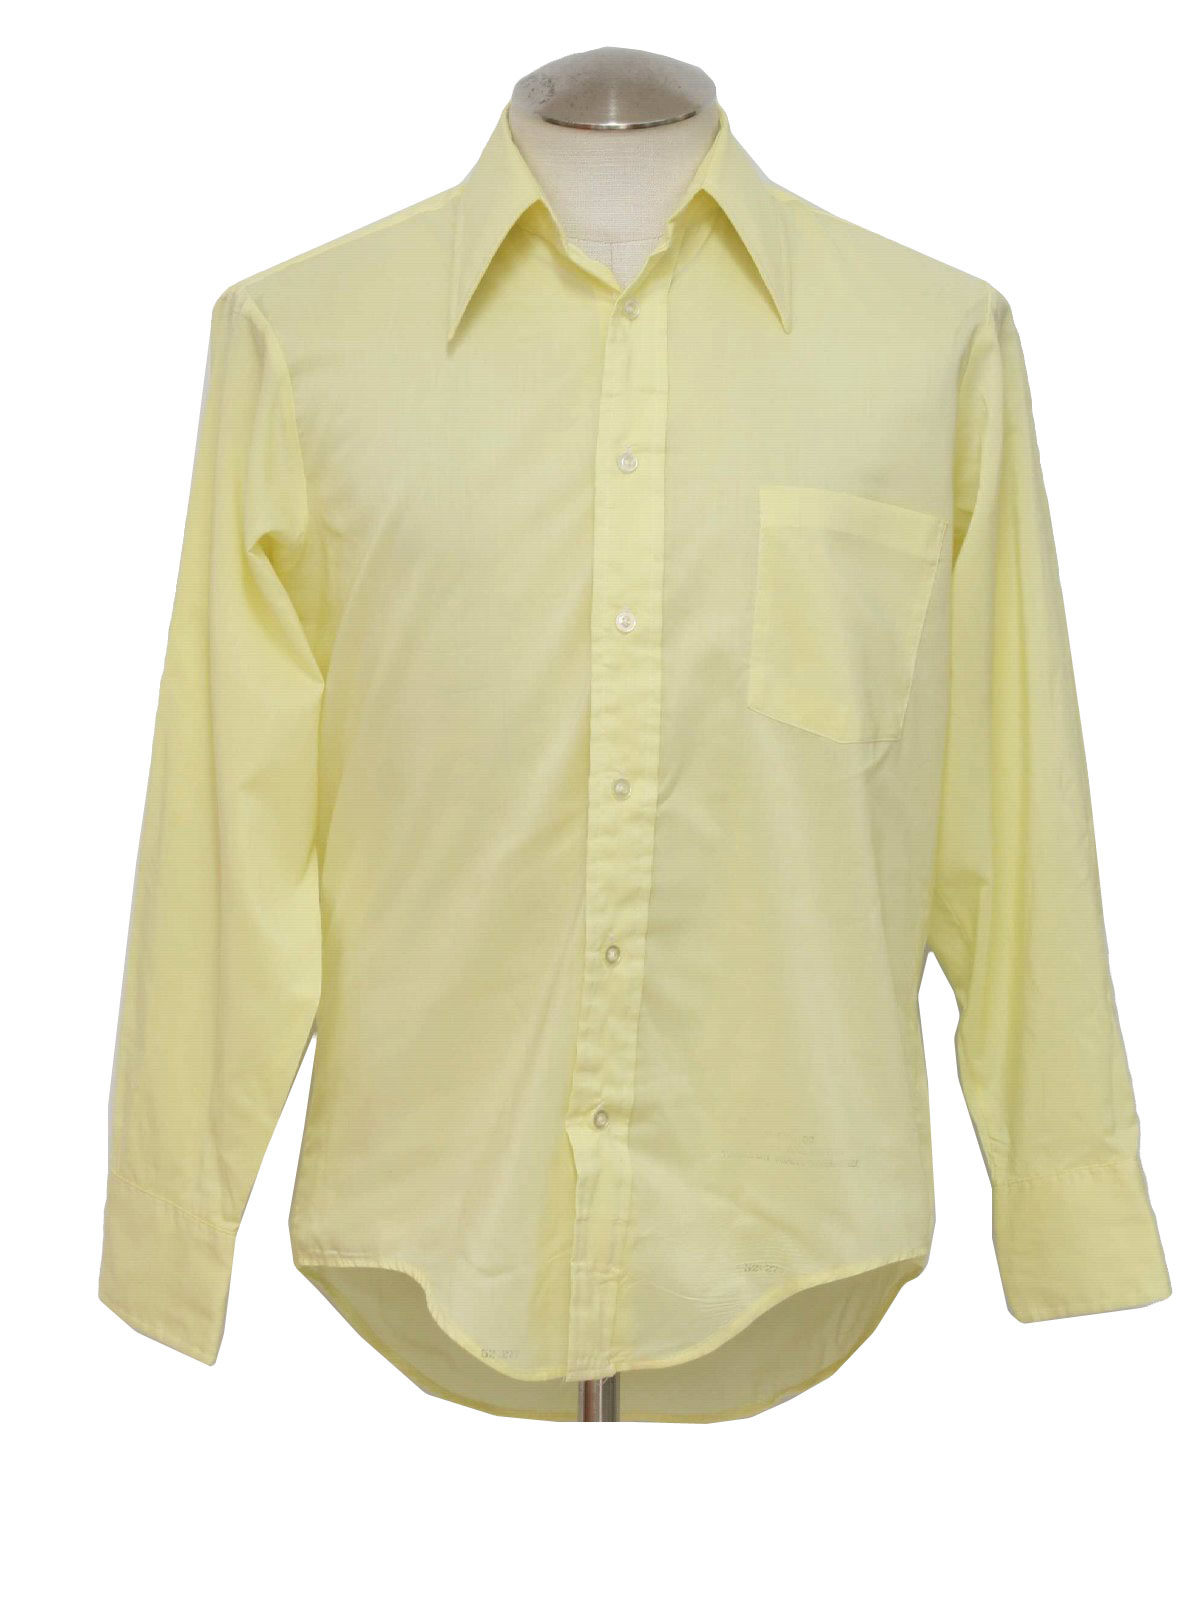 70s Retro Shirt: 70s -JC Penney- Mens lemon yellow cotton and polyester ...